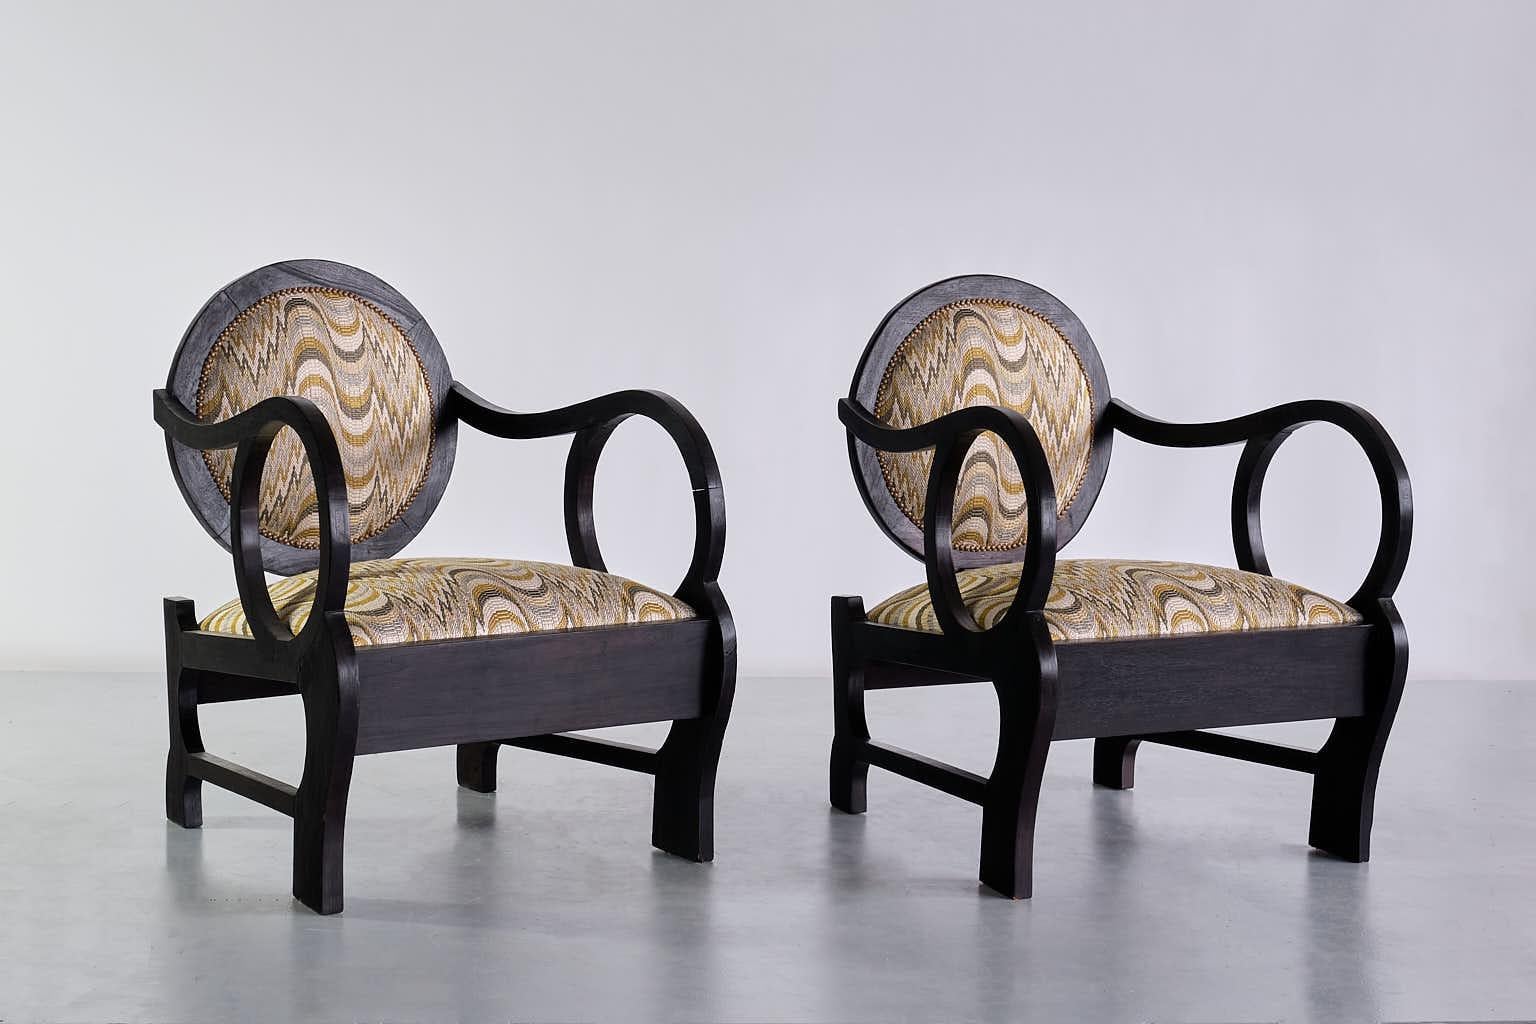 Hungarian Pair of Lajos Kozma Attributed Armchairs in Oak and Dedar Jacquard, Late 1940s For Sale